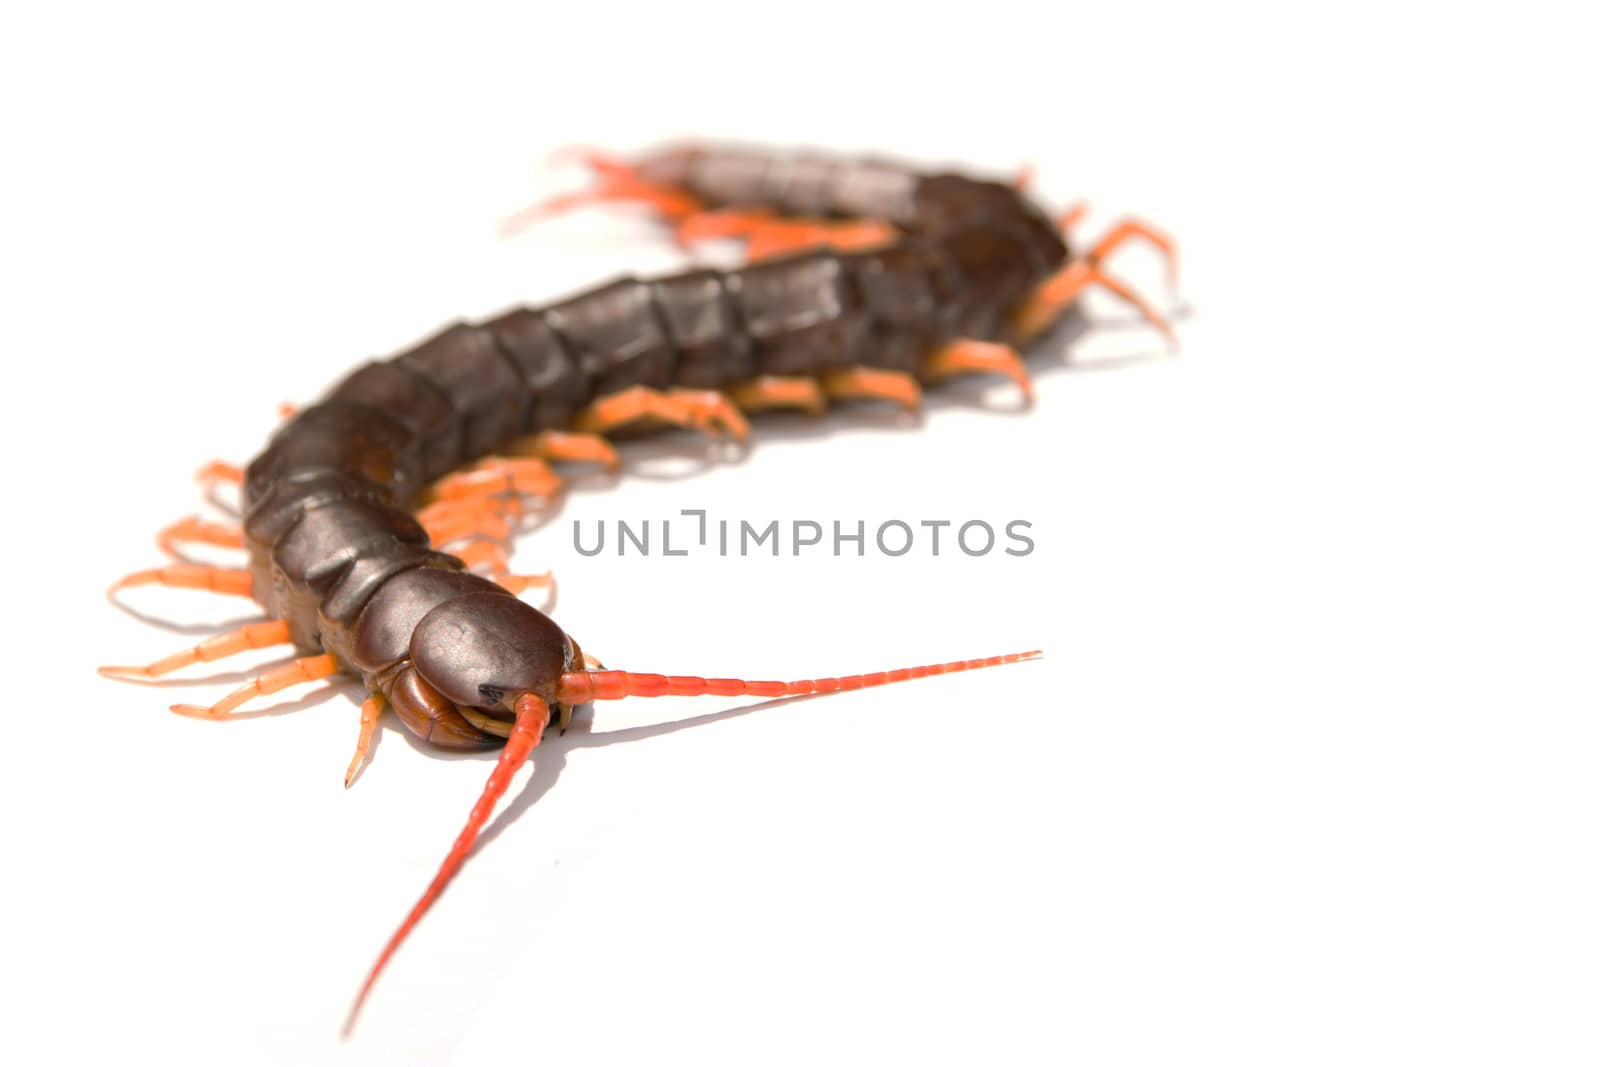 Giant centipede Scolopendra subspinipes isolated on white backgr by kirisa99